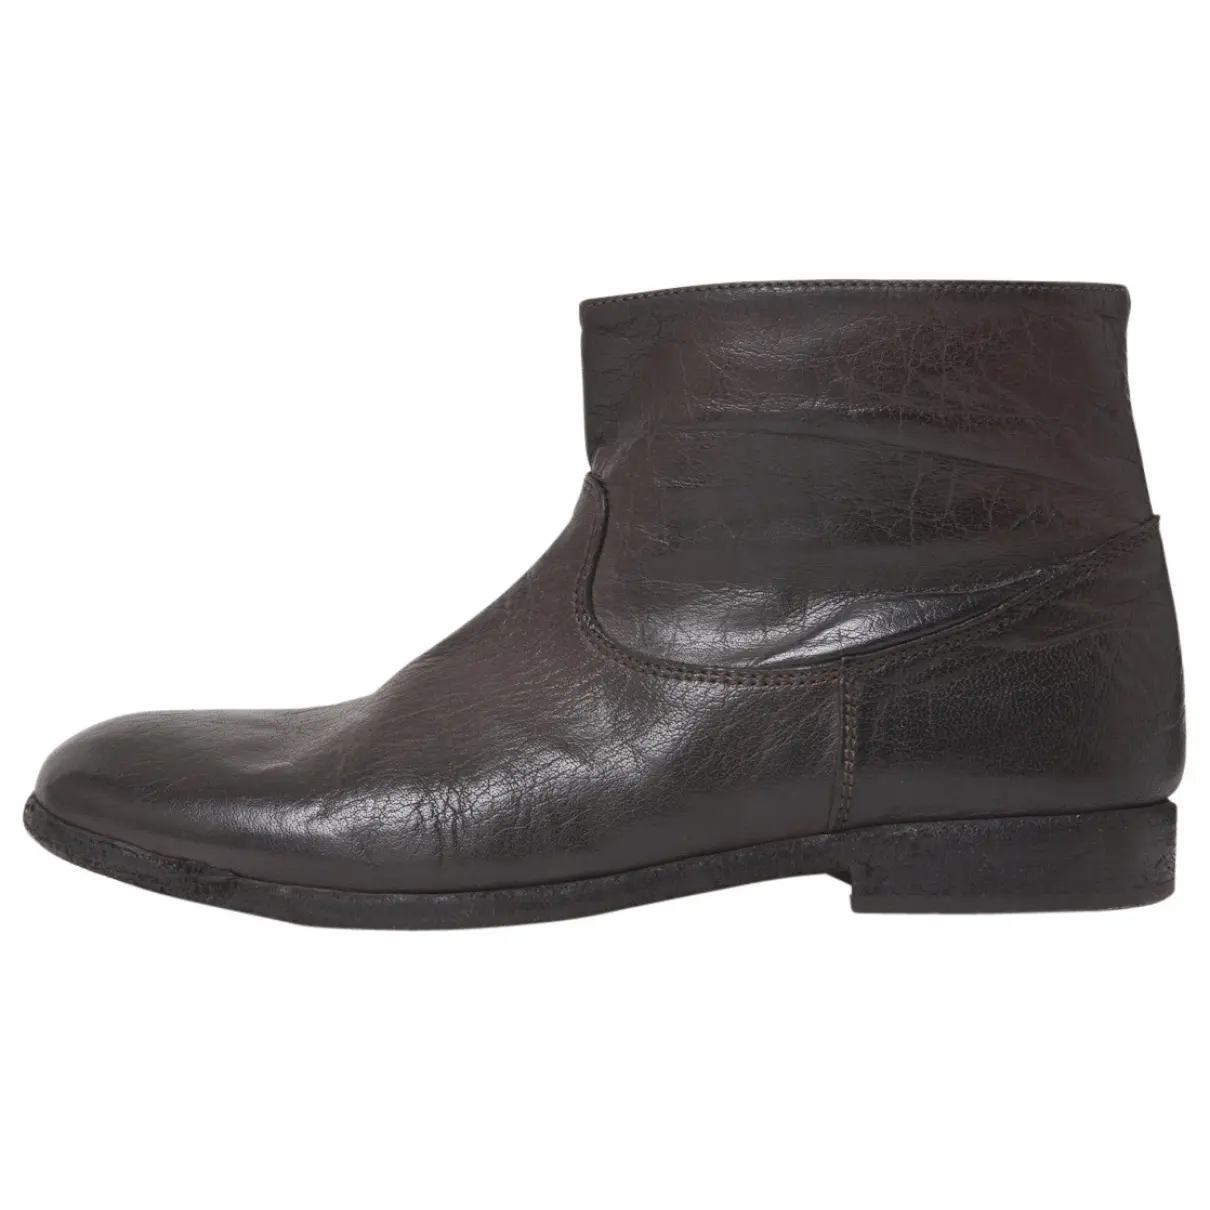 CHOCOLATE GRAINED LEATHER ANKLE BOOTS Bonpoint